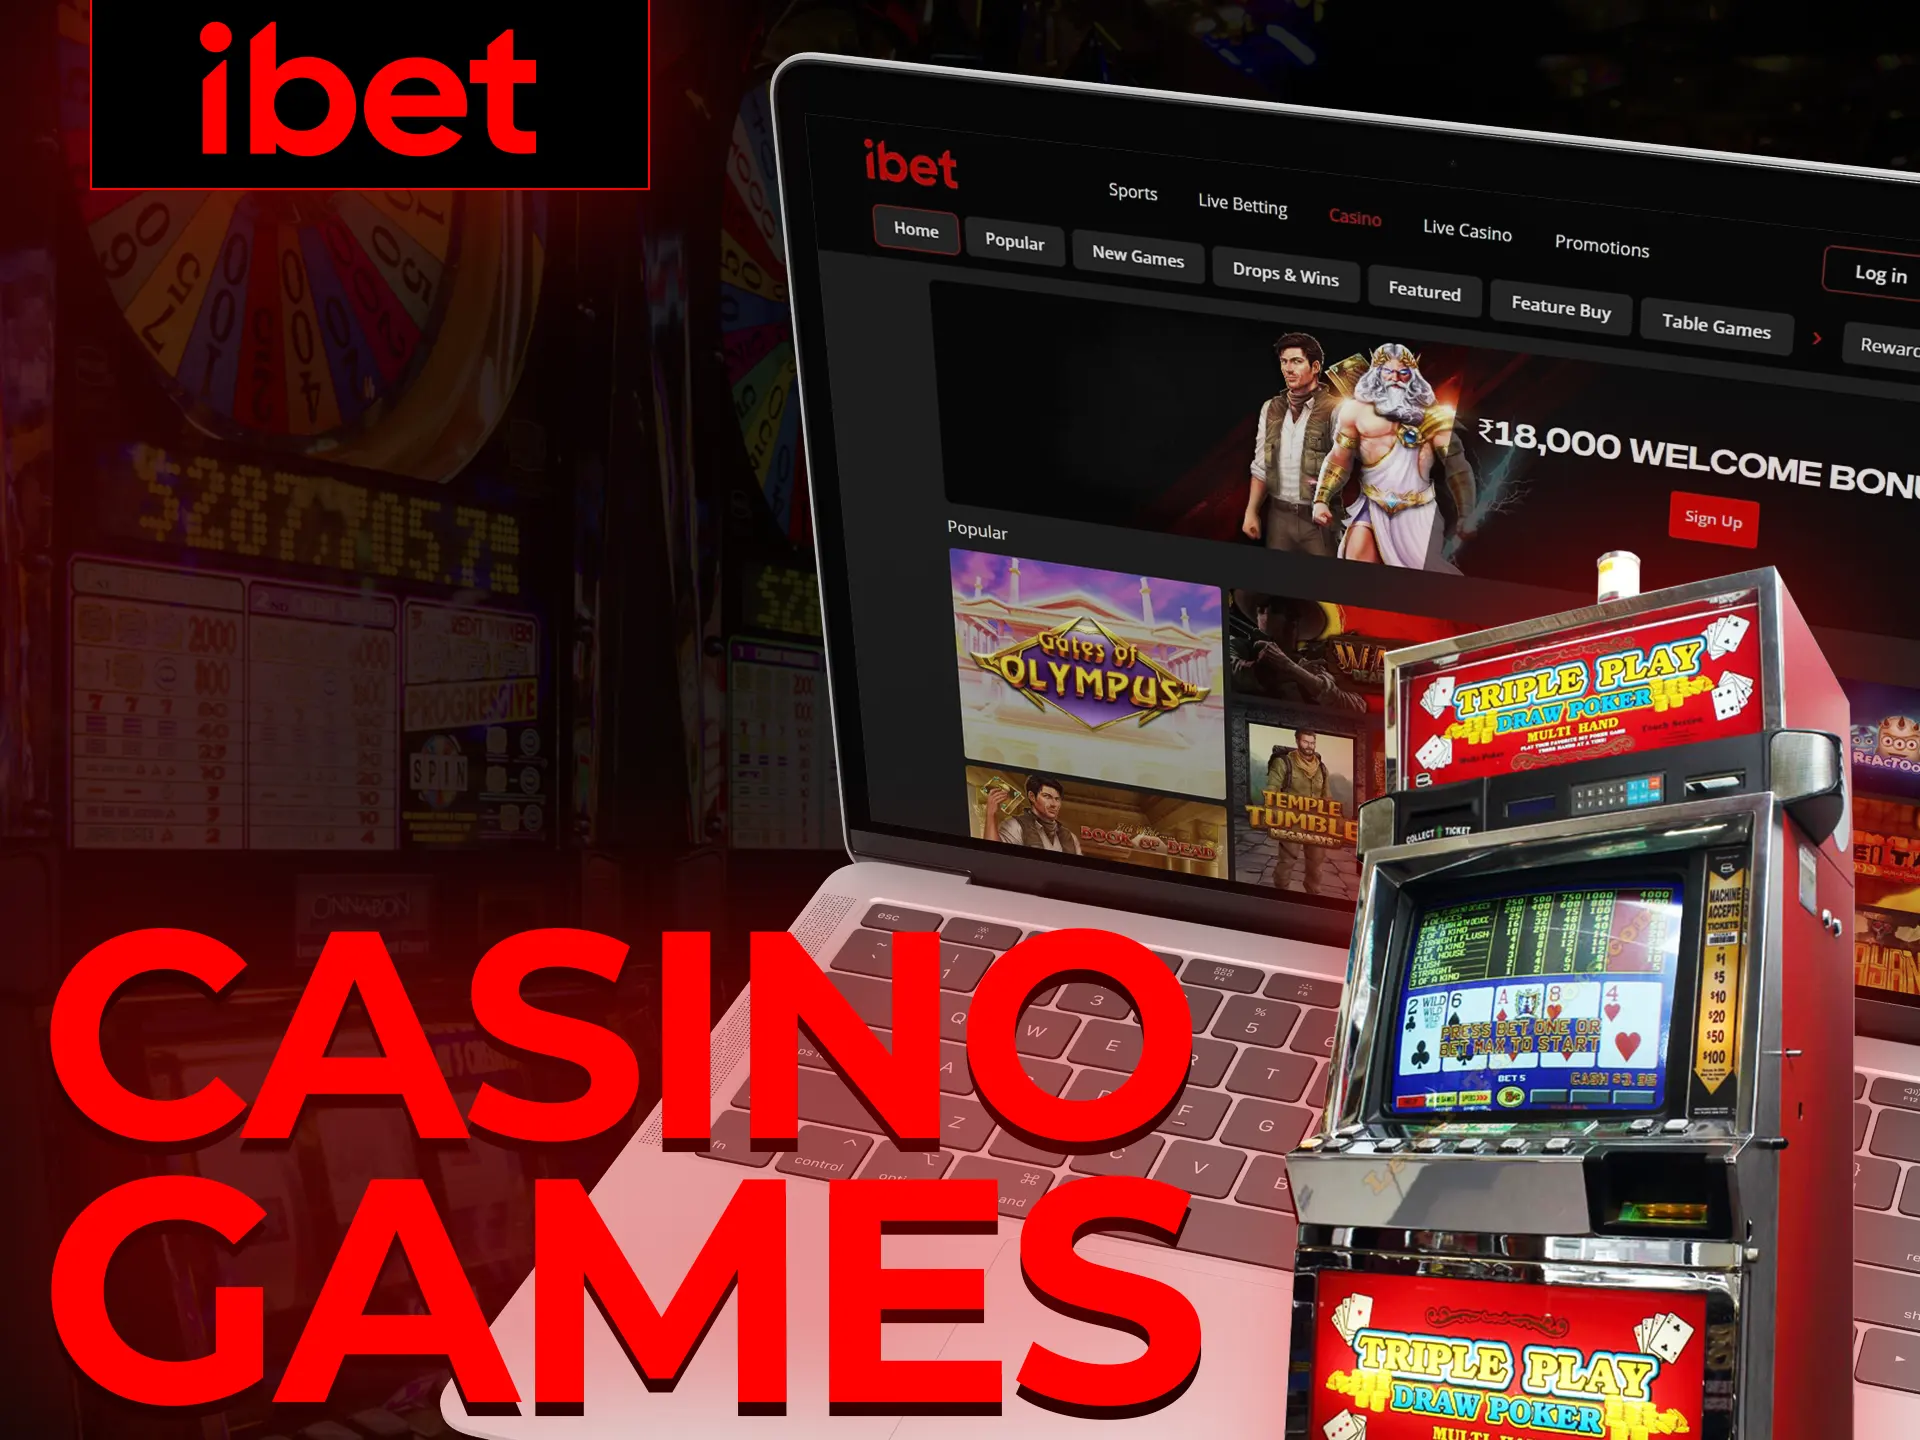 Familiarize yourself with the most popular games on iBet.